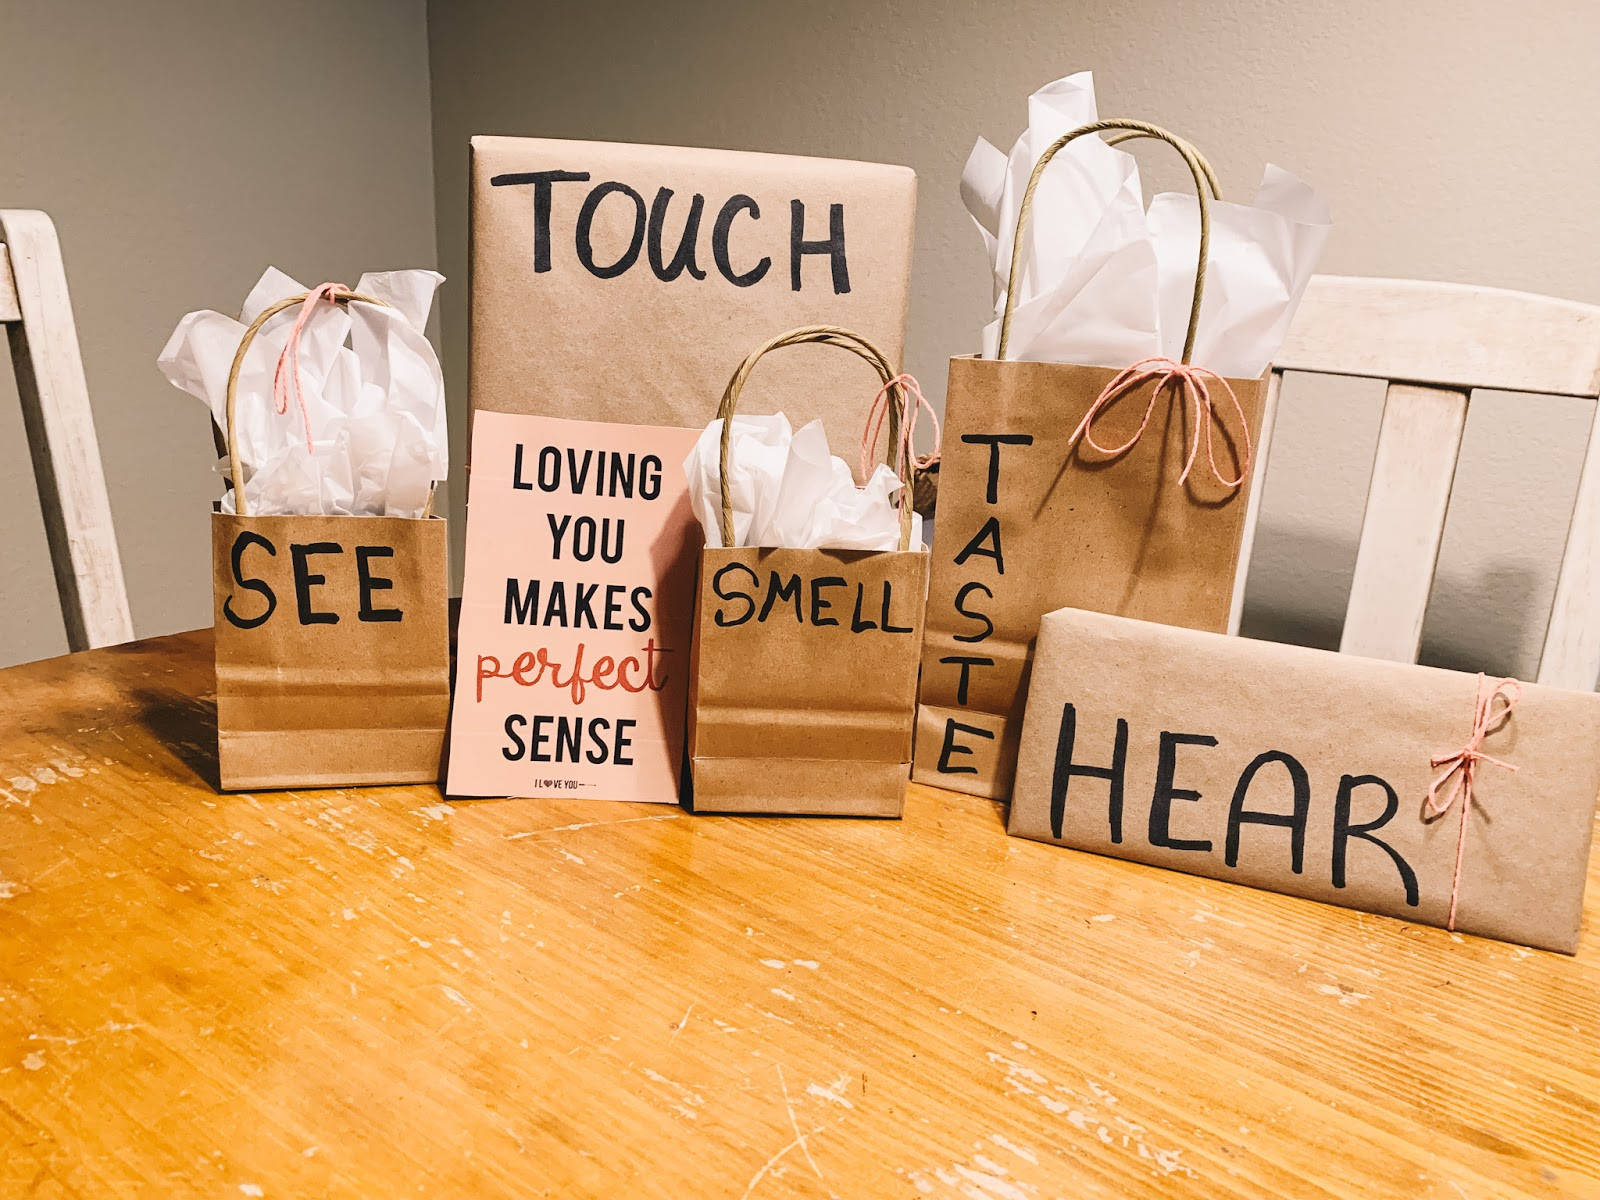 Creative Valentine Day Gift Ideas For Him
 The 5 Senses Valentines Day Gift Ideas for Him & Her